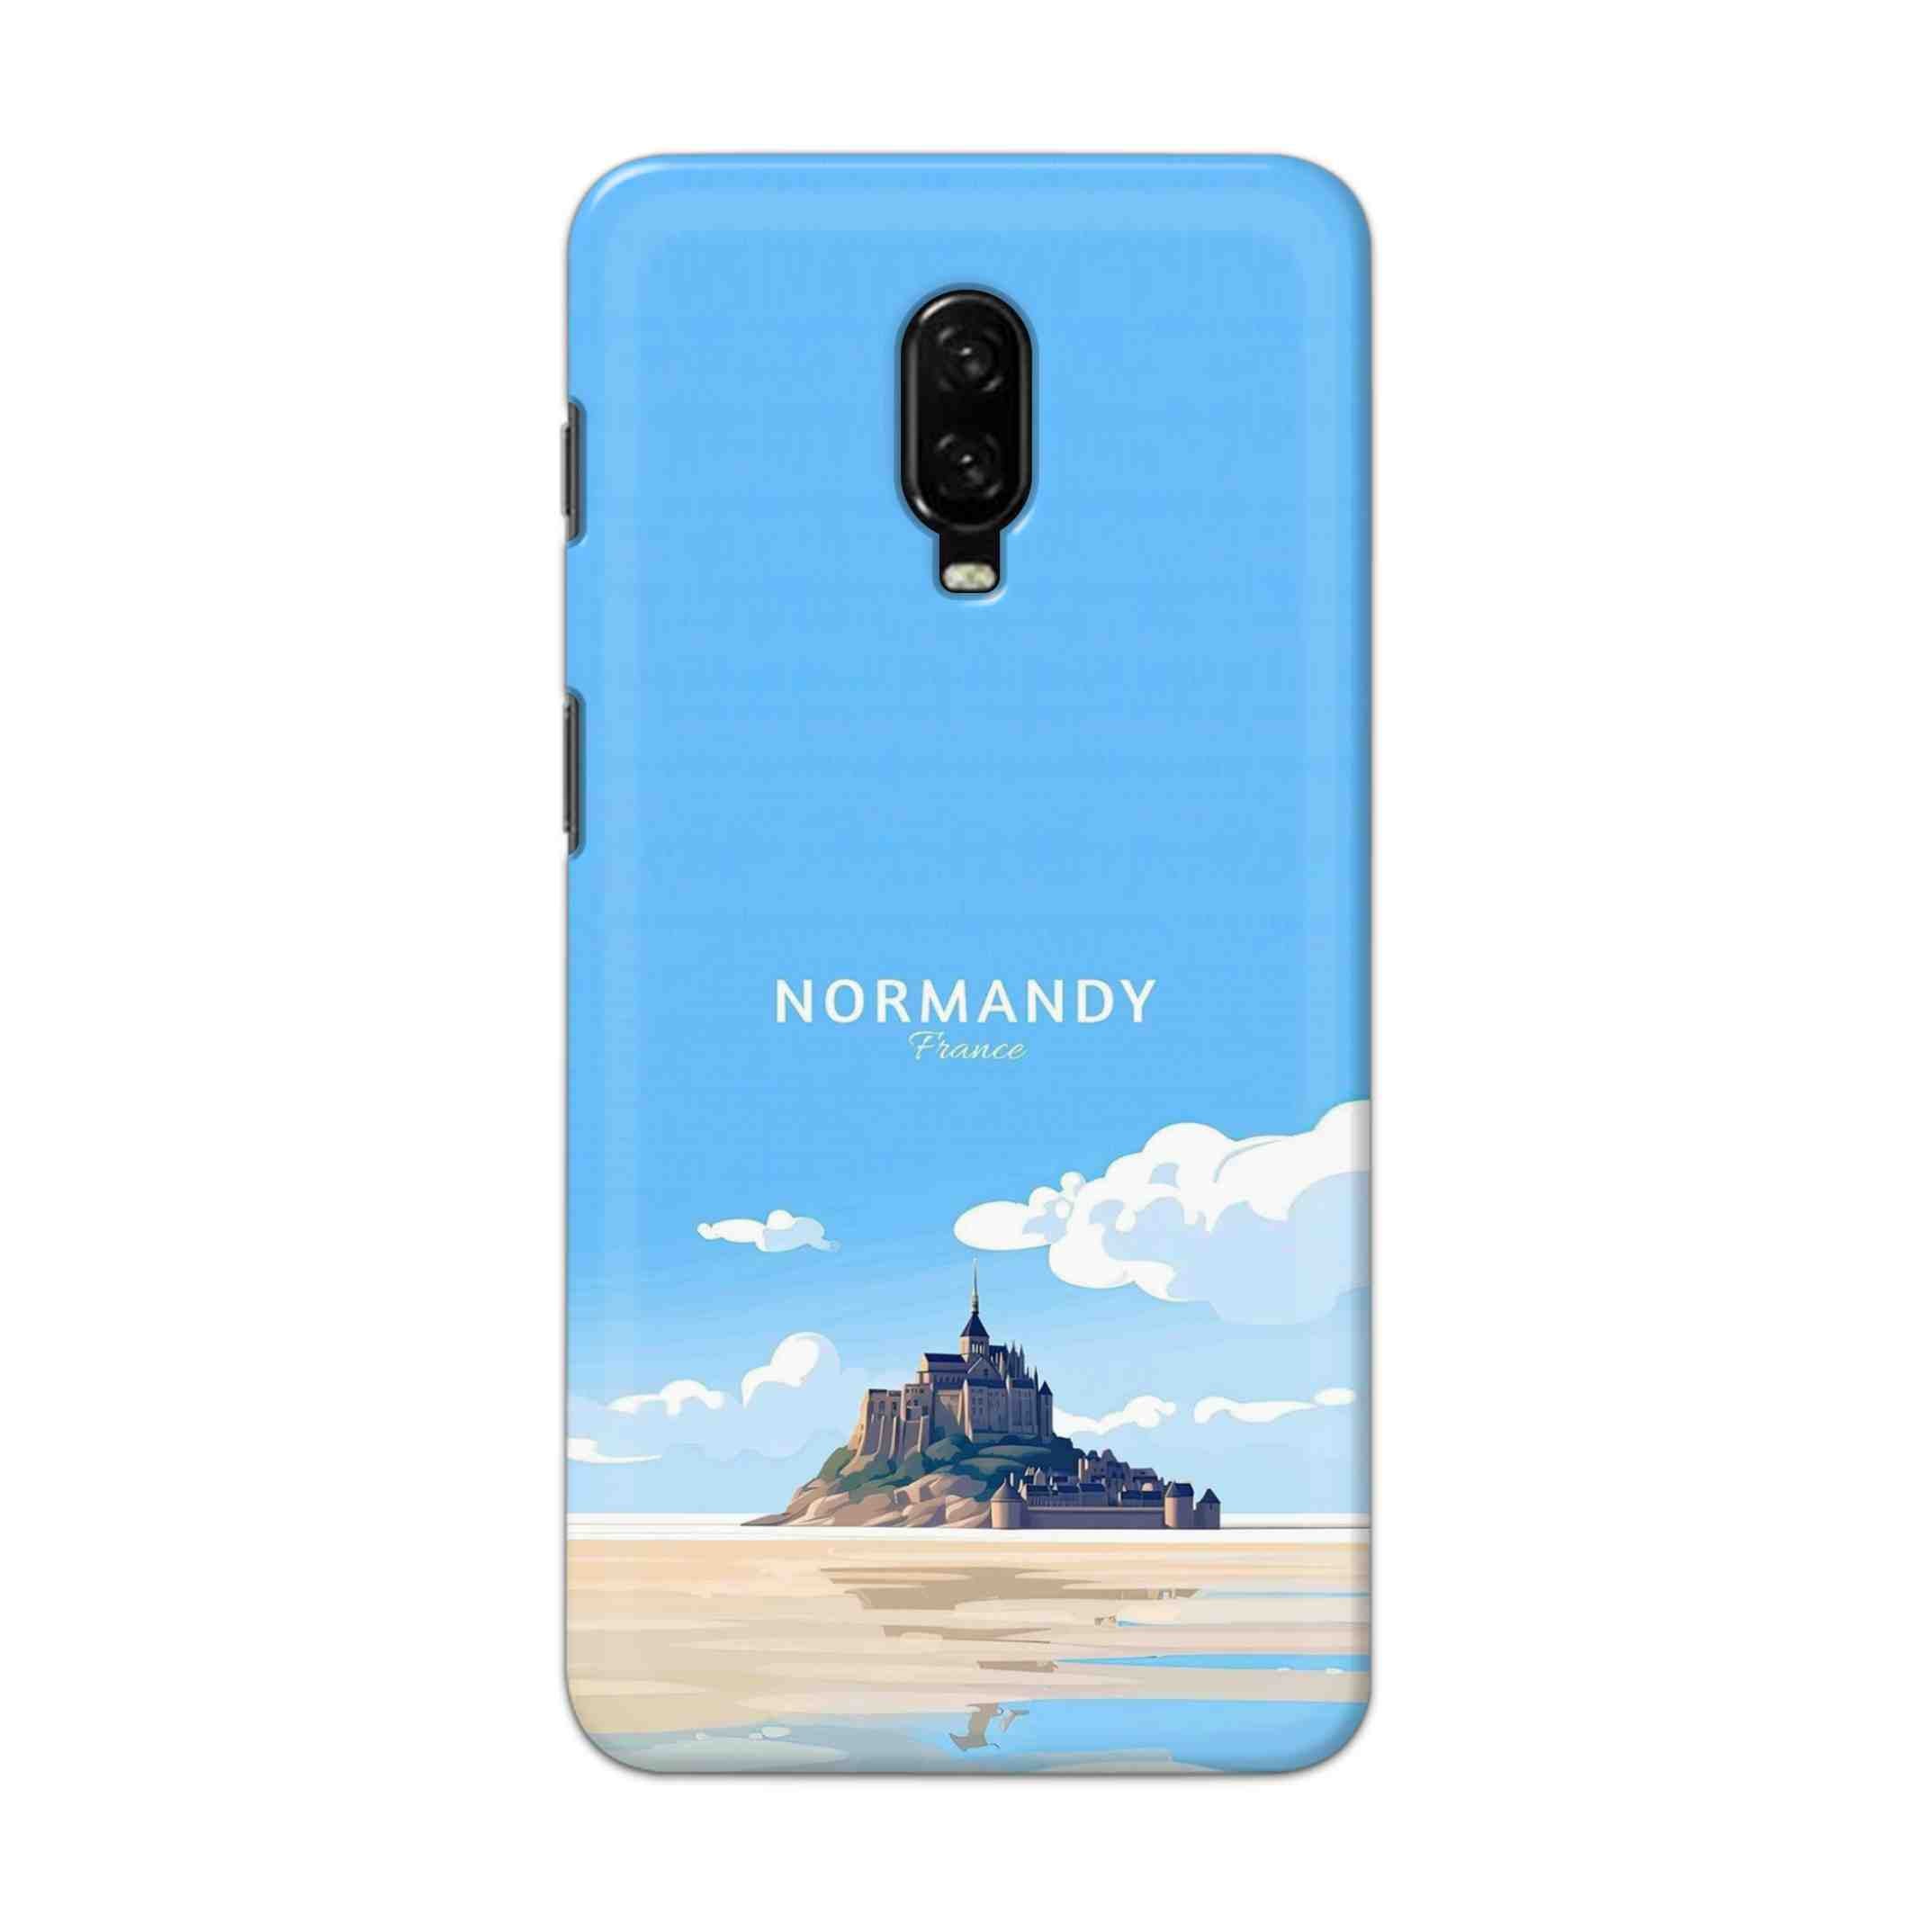 Buy Normandy Hard Back Mobile Phone Case Cover For OnePlus 6T Online